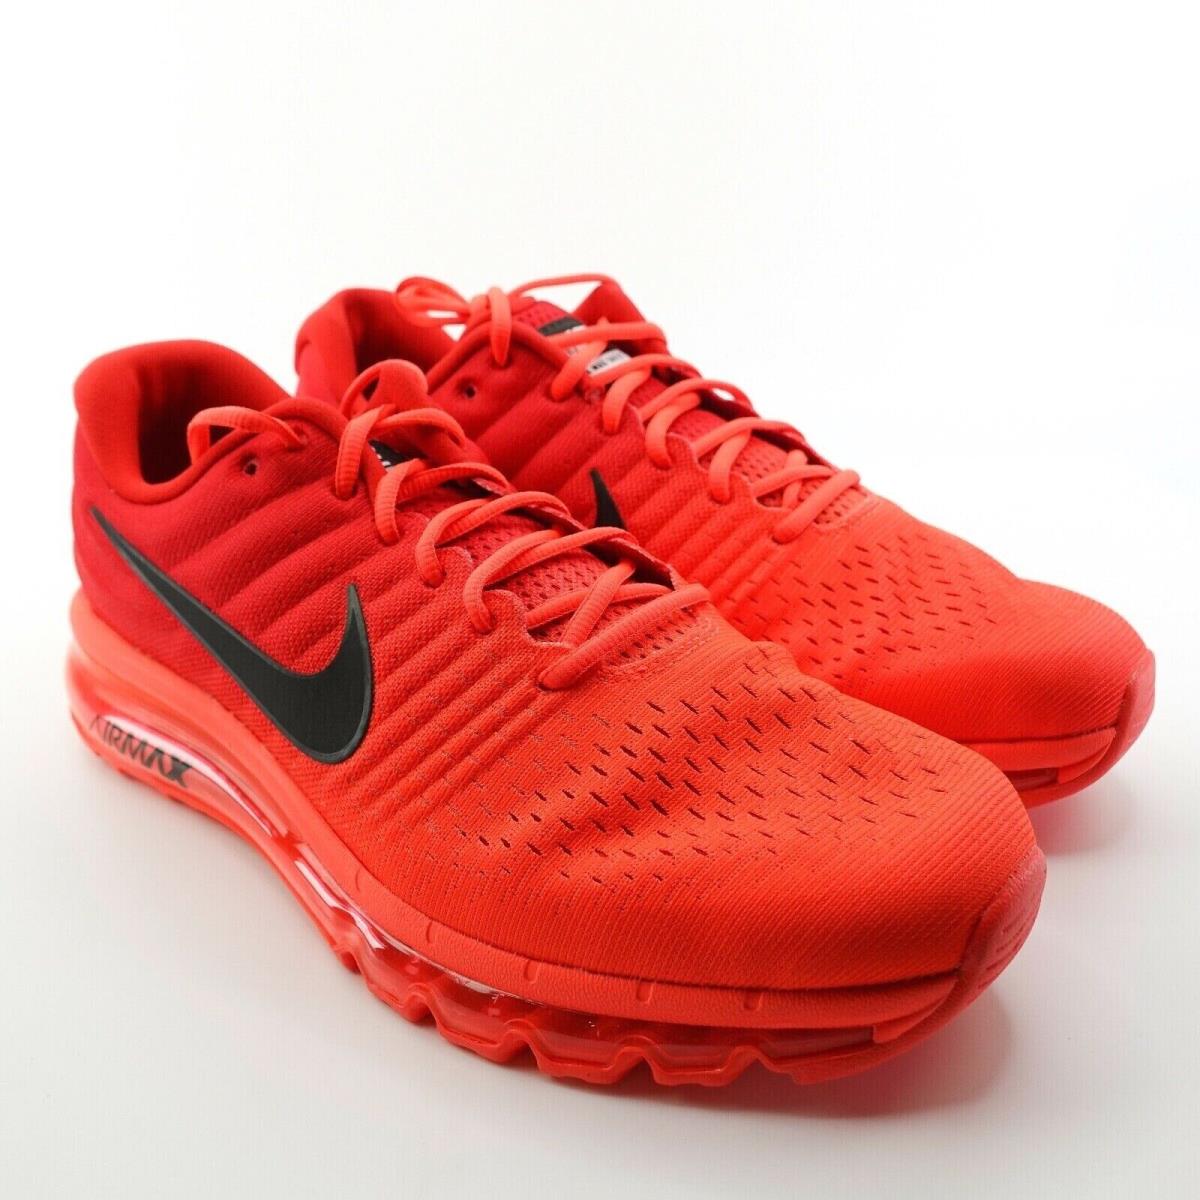 Nike shoes Air Max - Red 5